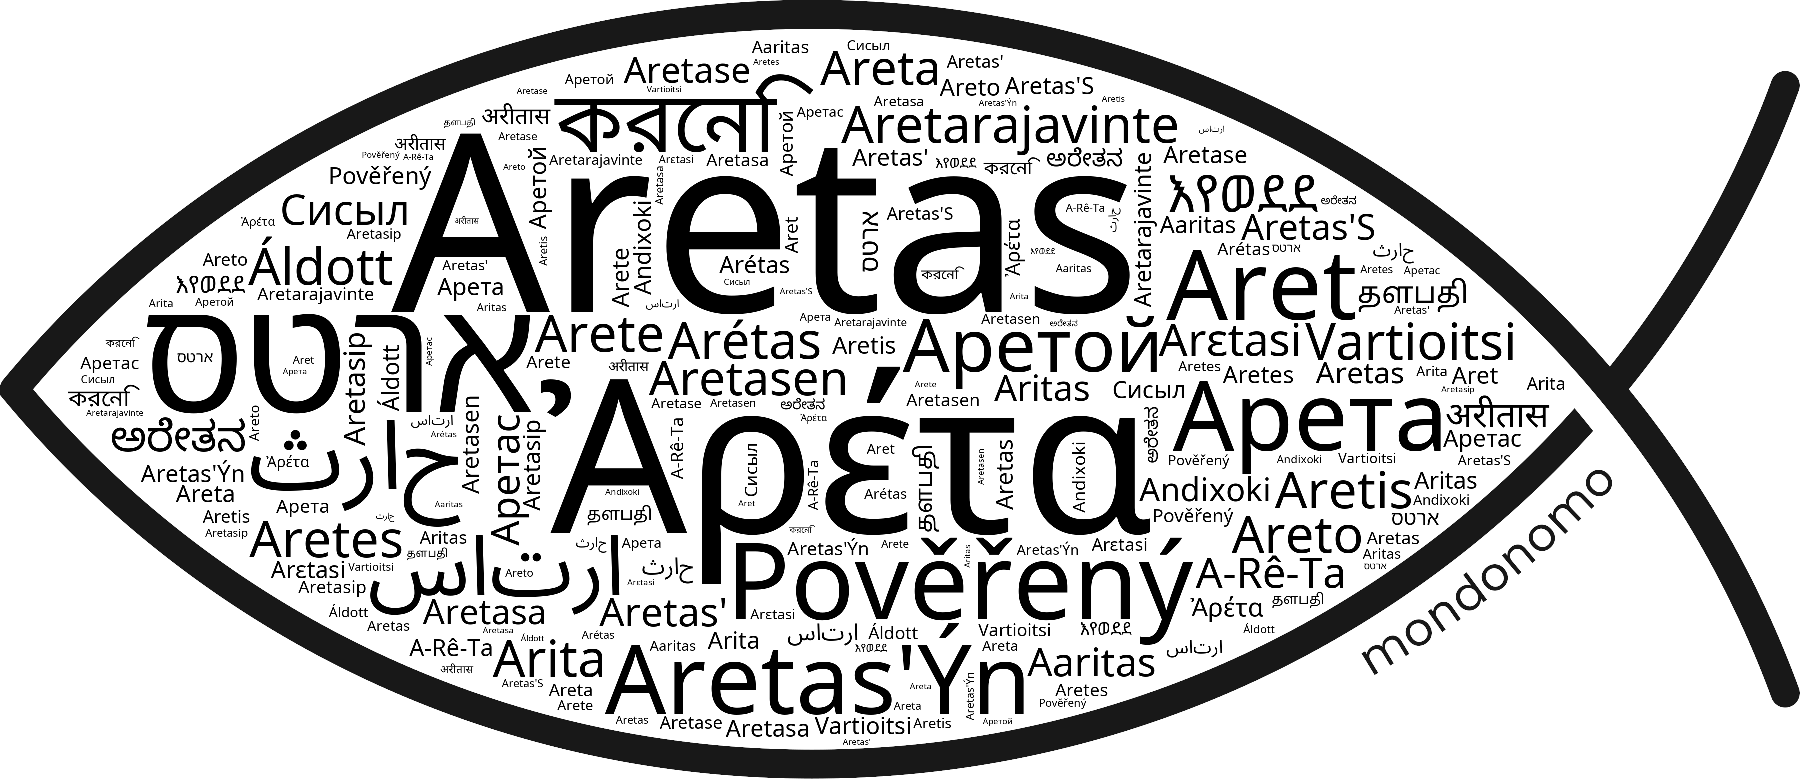 Name Aretas in the world's Bibles